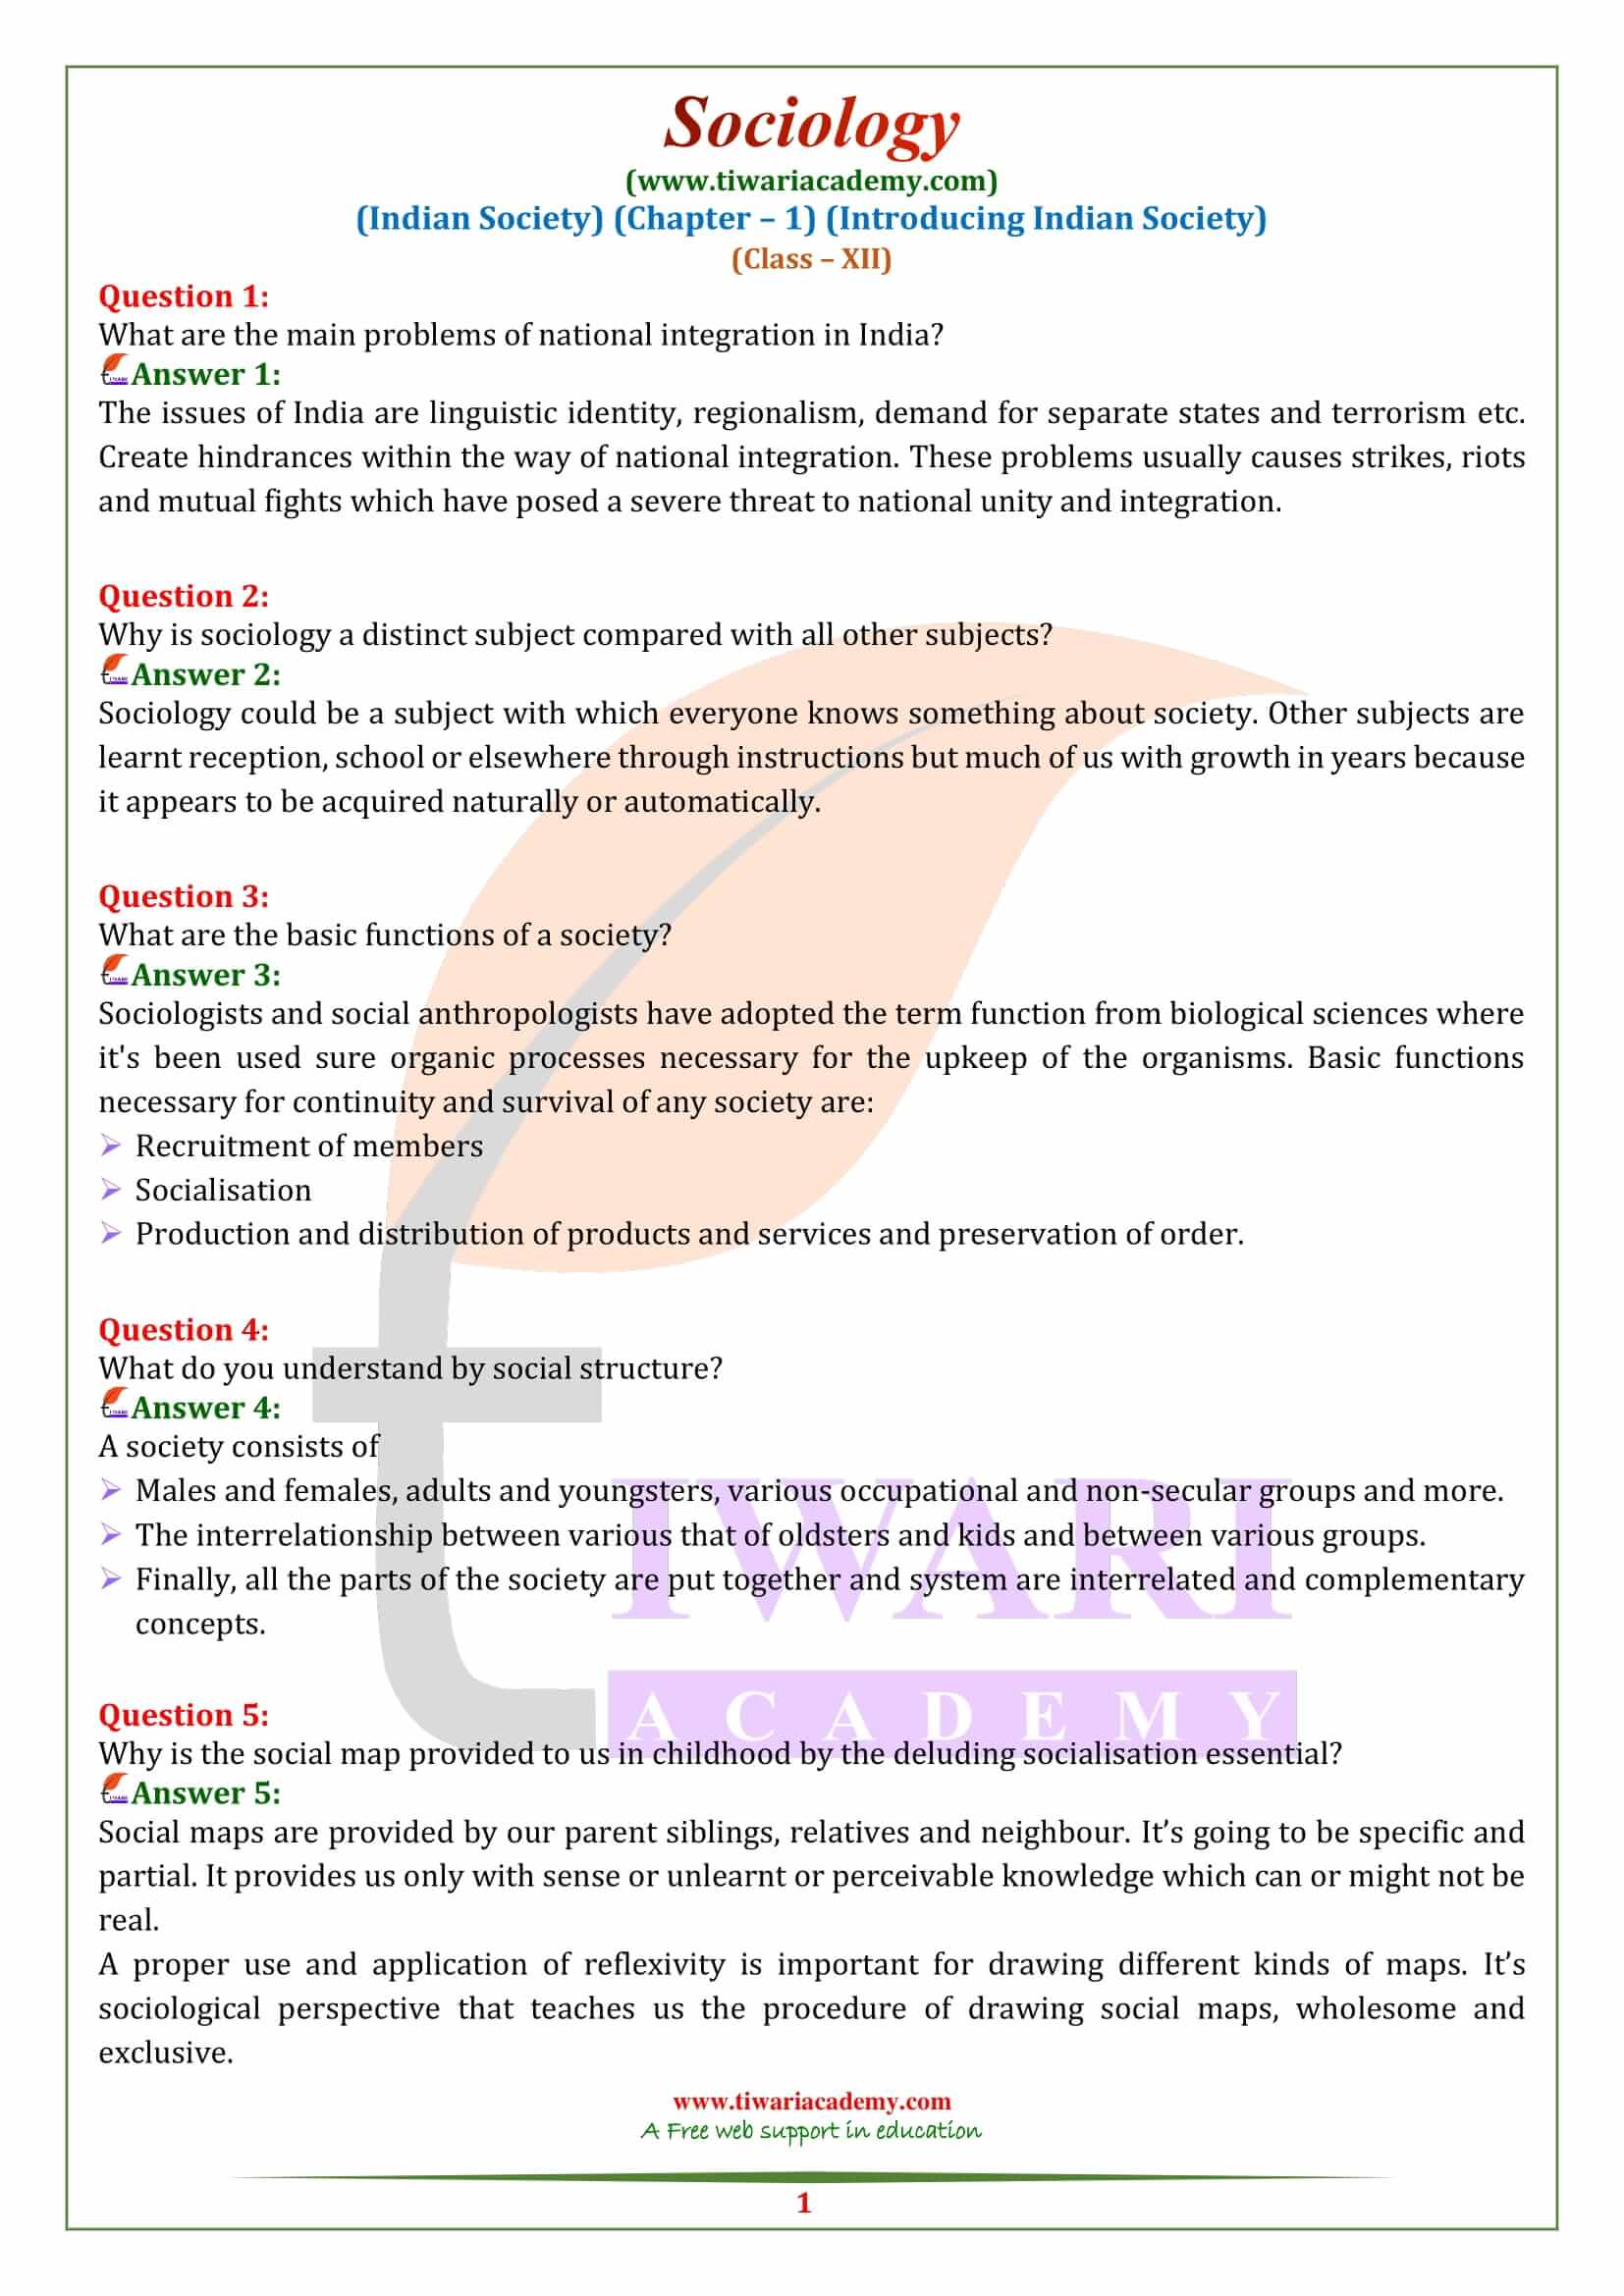 Class 12 Sociology Chapter 1 Introducing Indian Society